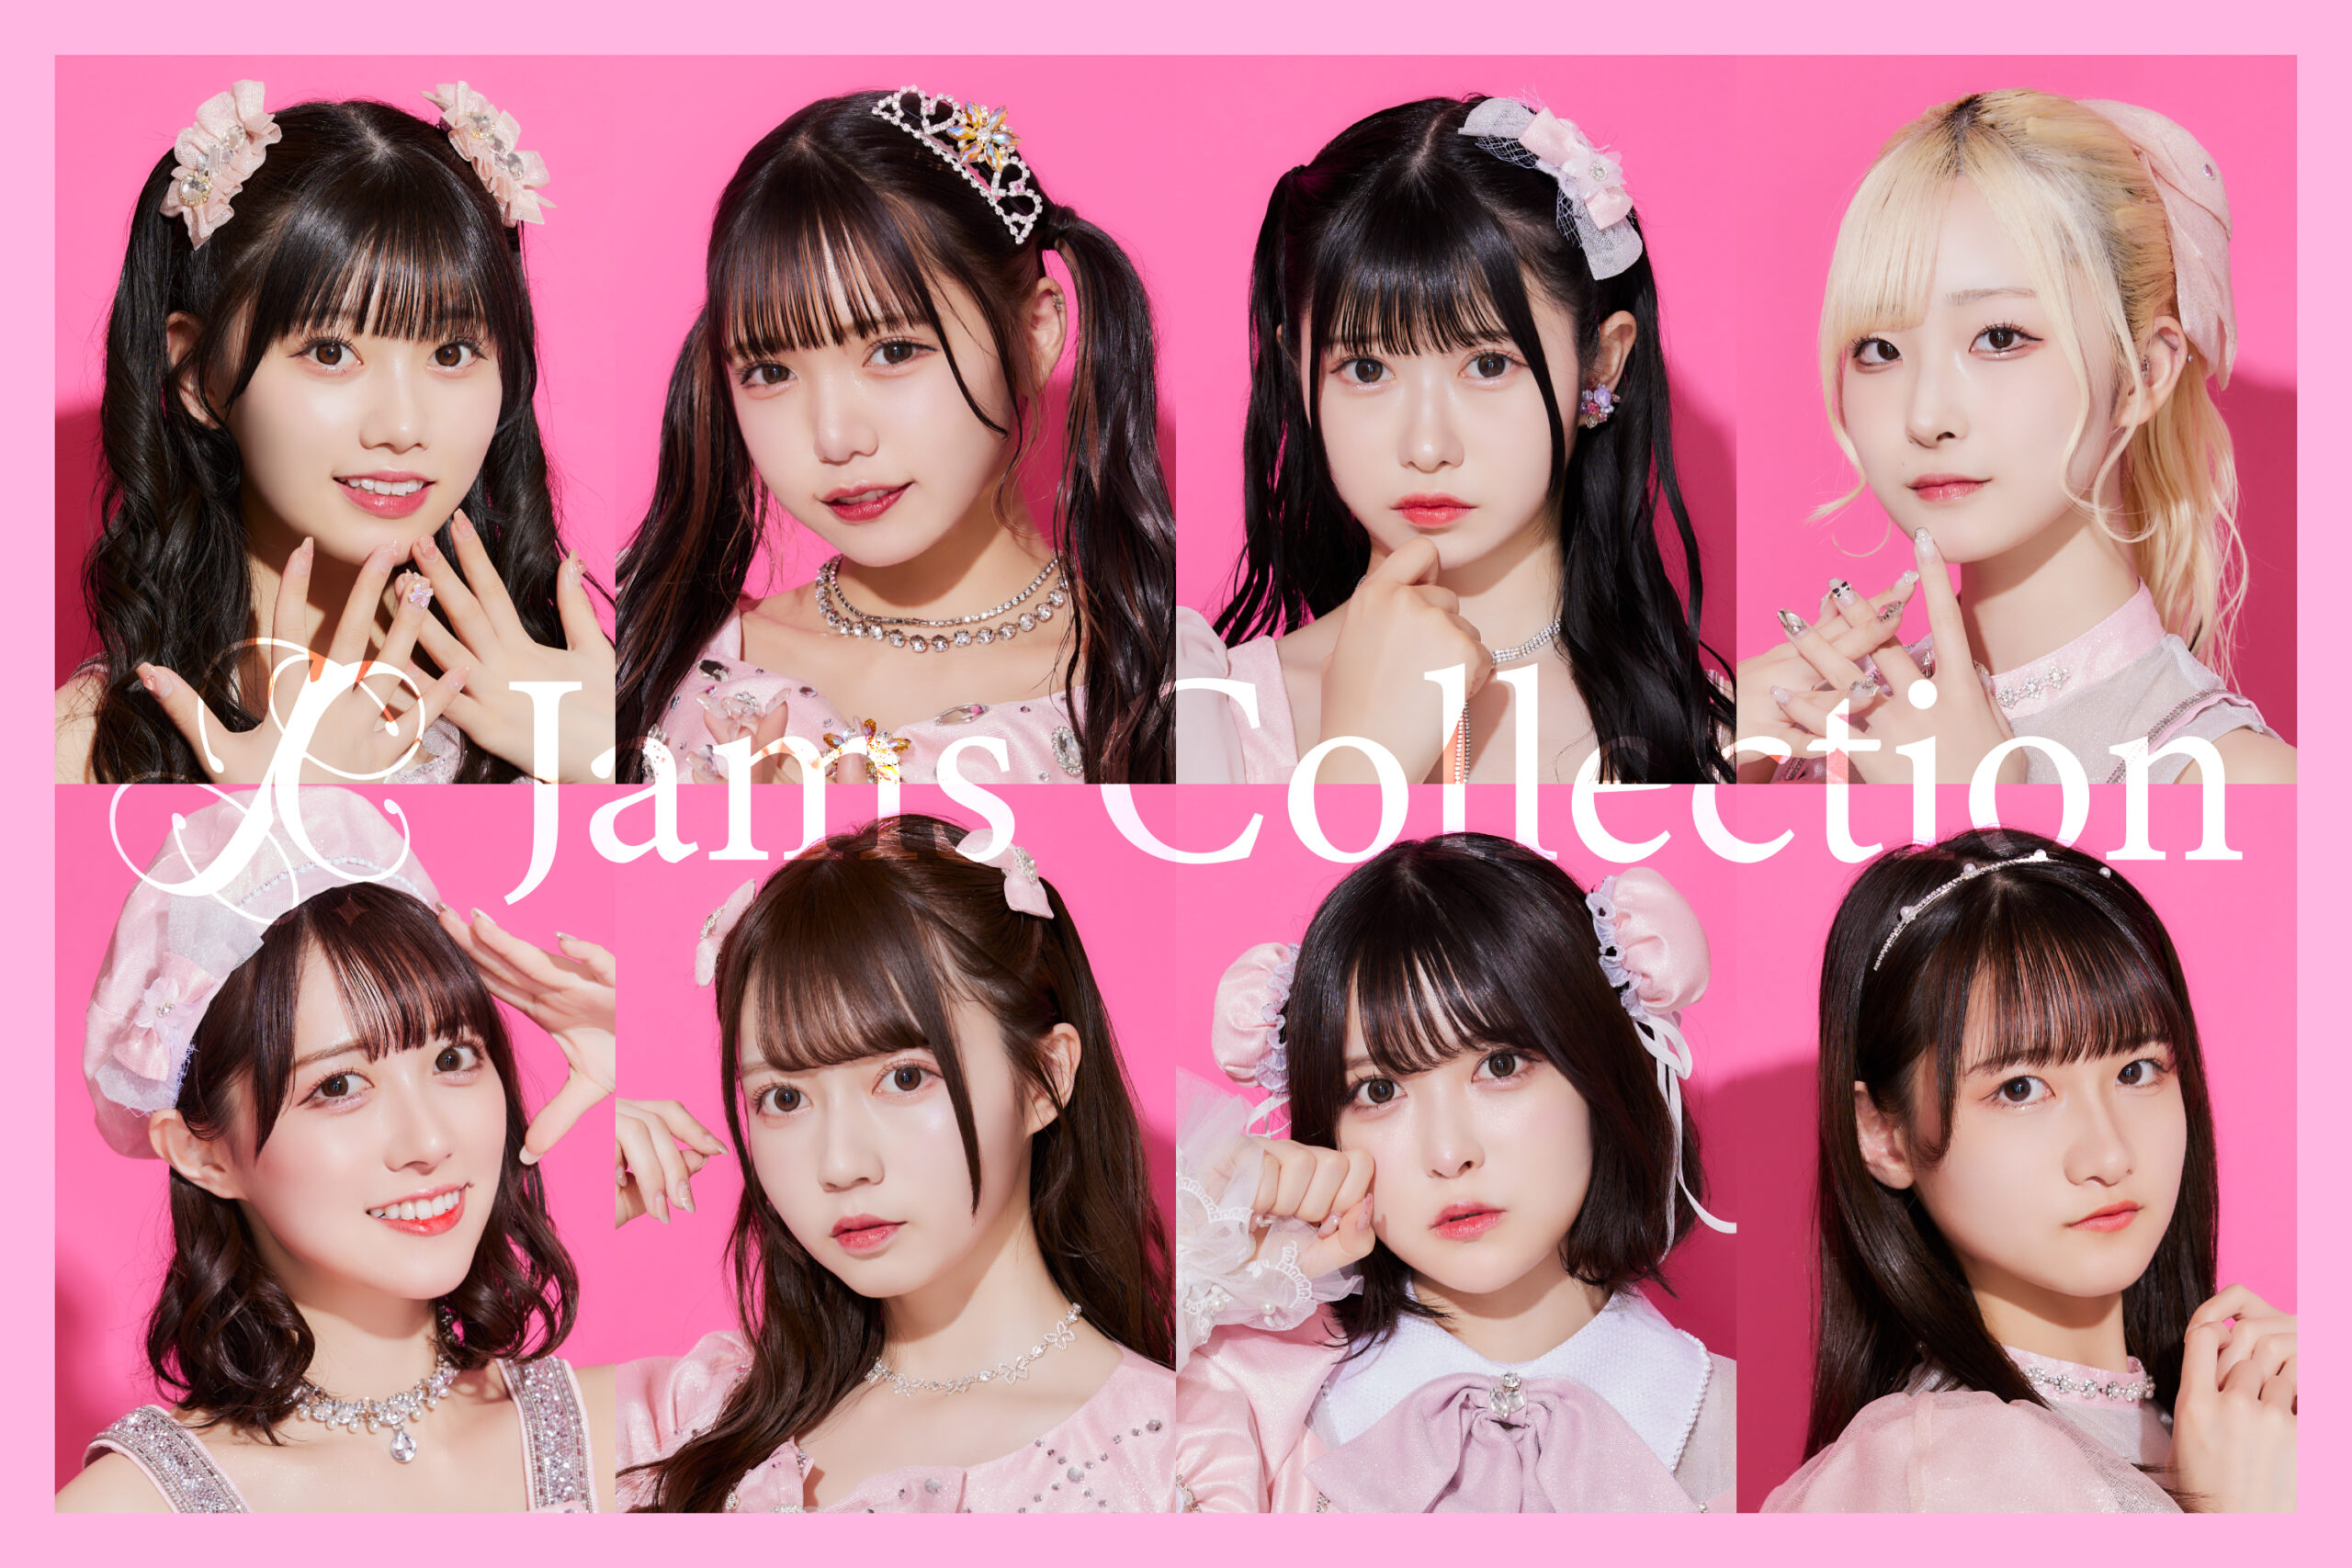 Jams Collection、今年の夏も“水着で”MV!! ティザームービー公開＆新曲4曲サブスク先行配信決！：Jams Collection